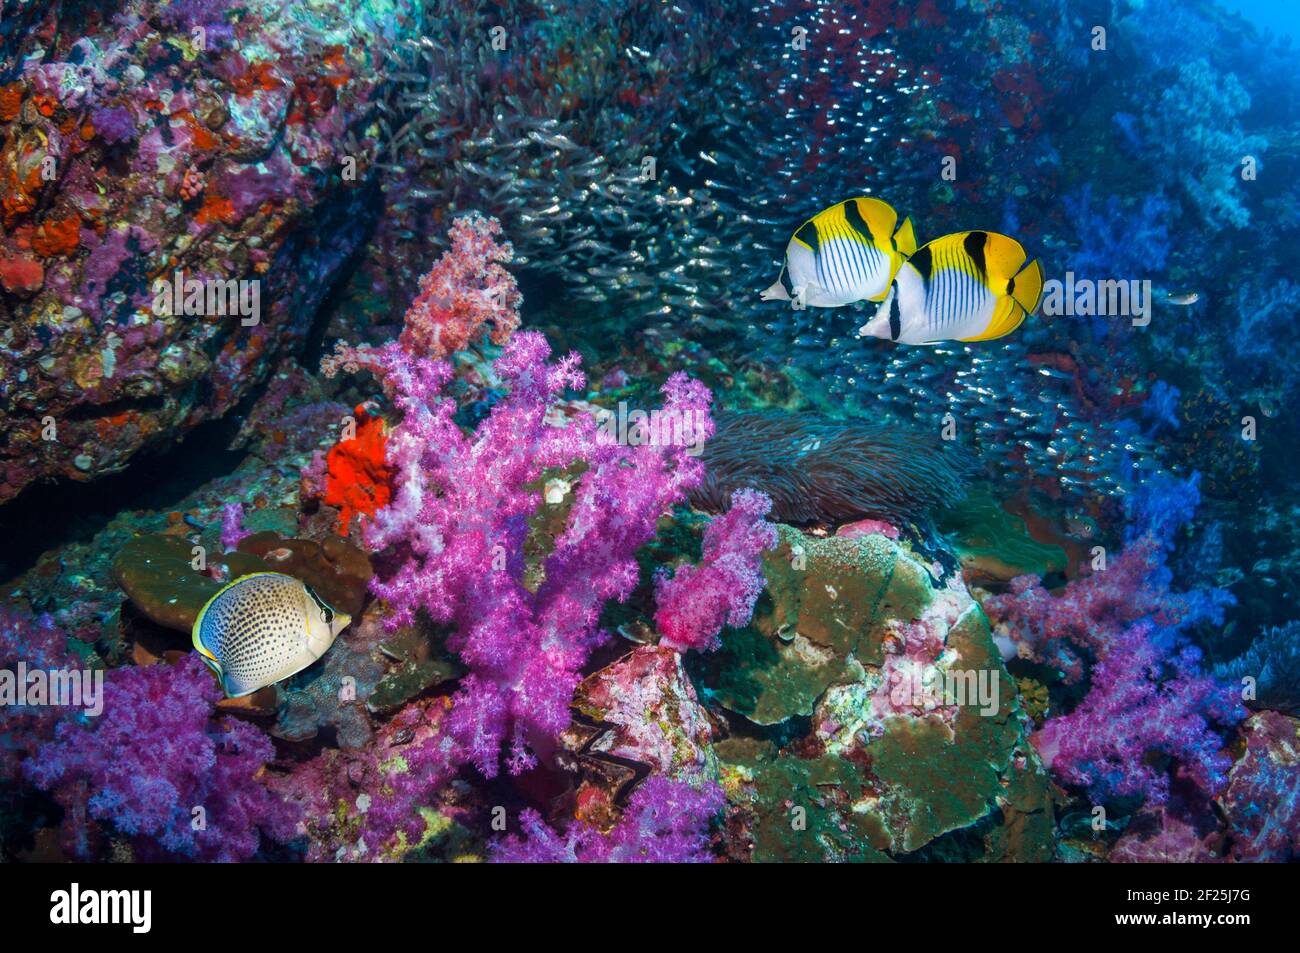 A pair of Saddleback or Blackwedge butterflyfish (Chaetodon falcula) and a Peppered butterflyfish (Chaetodon guttatissimus) swimming over coral reef w Stock Photo